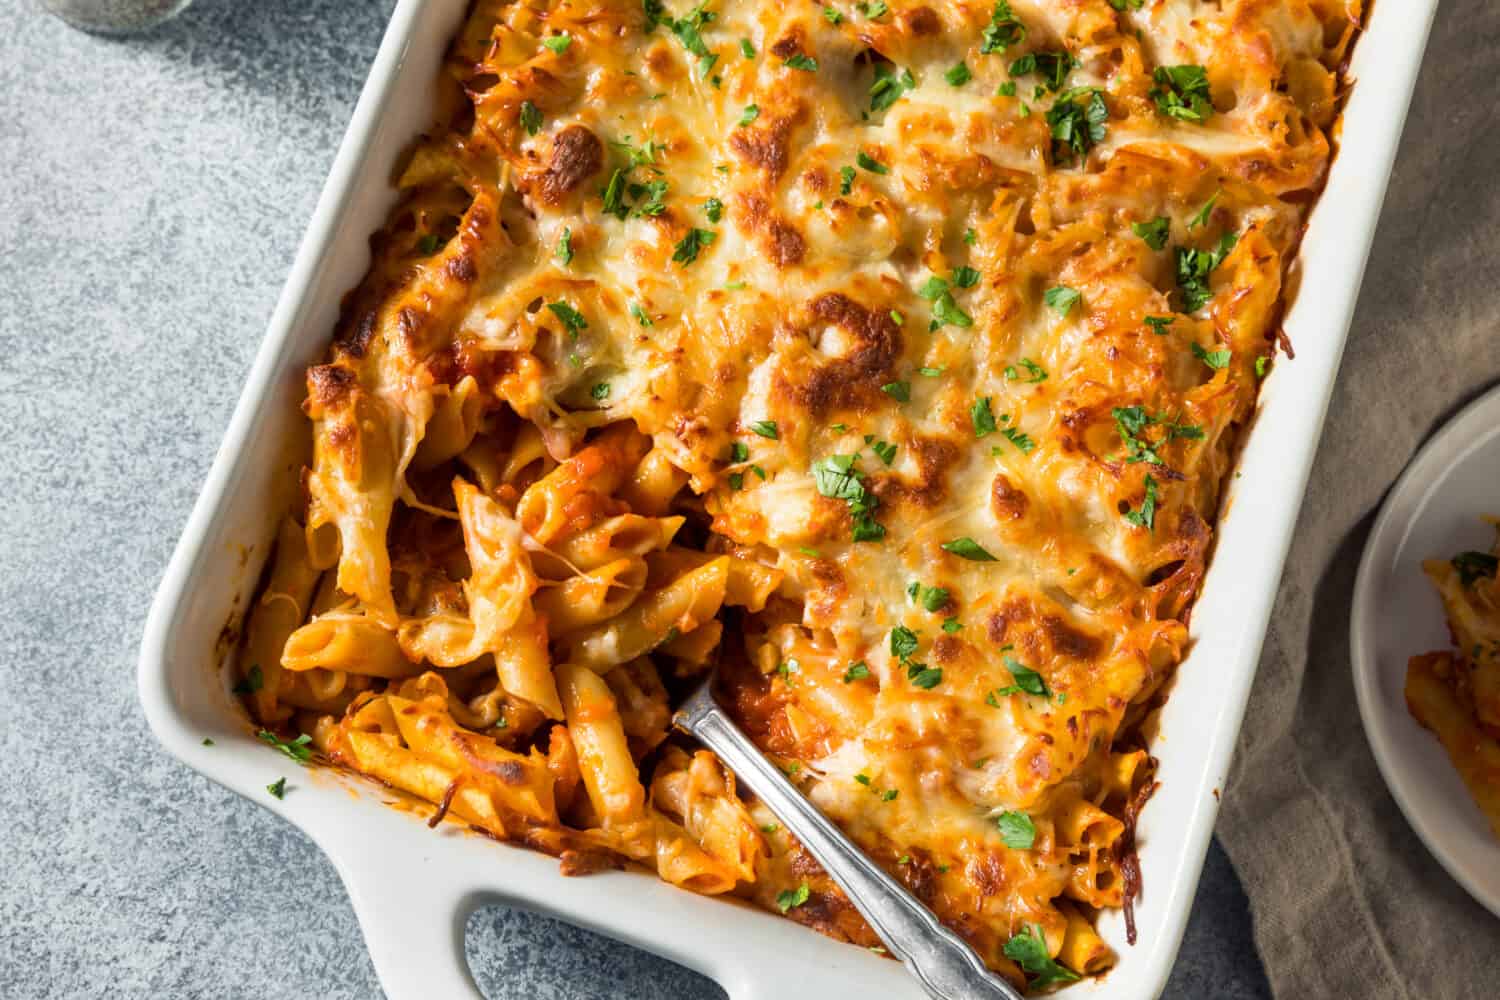 Mostaccioli Noodles vs. Penne: The Main Differences and When to Use Each